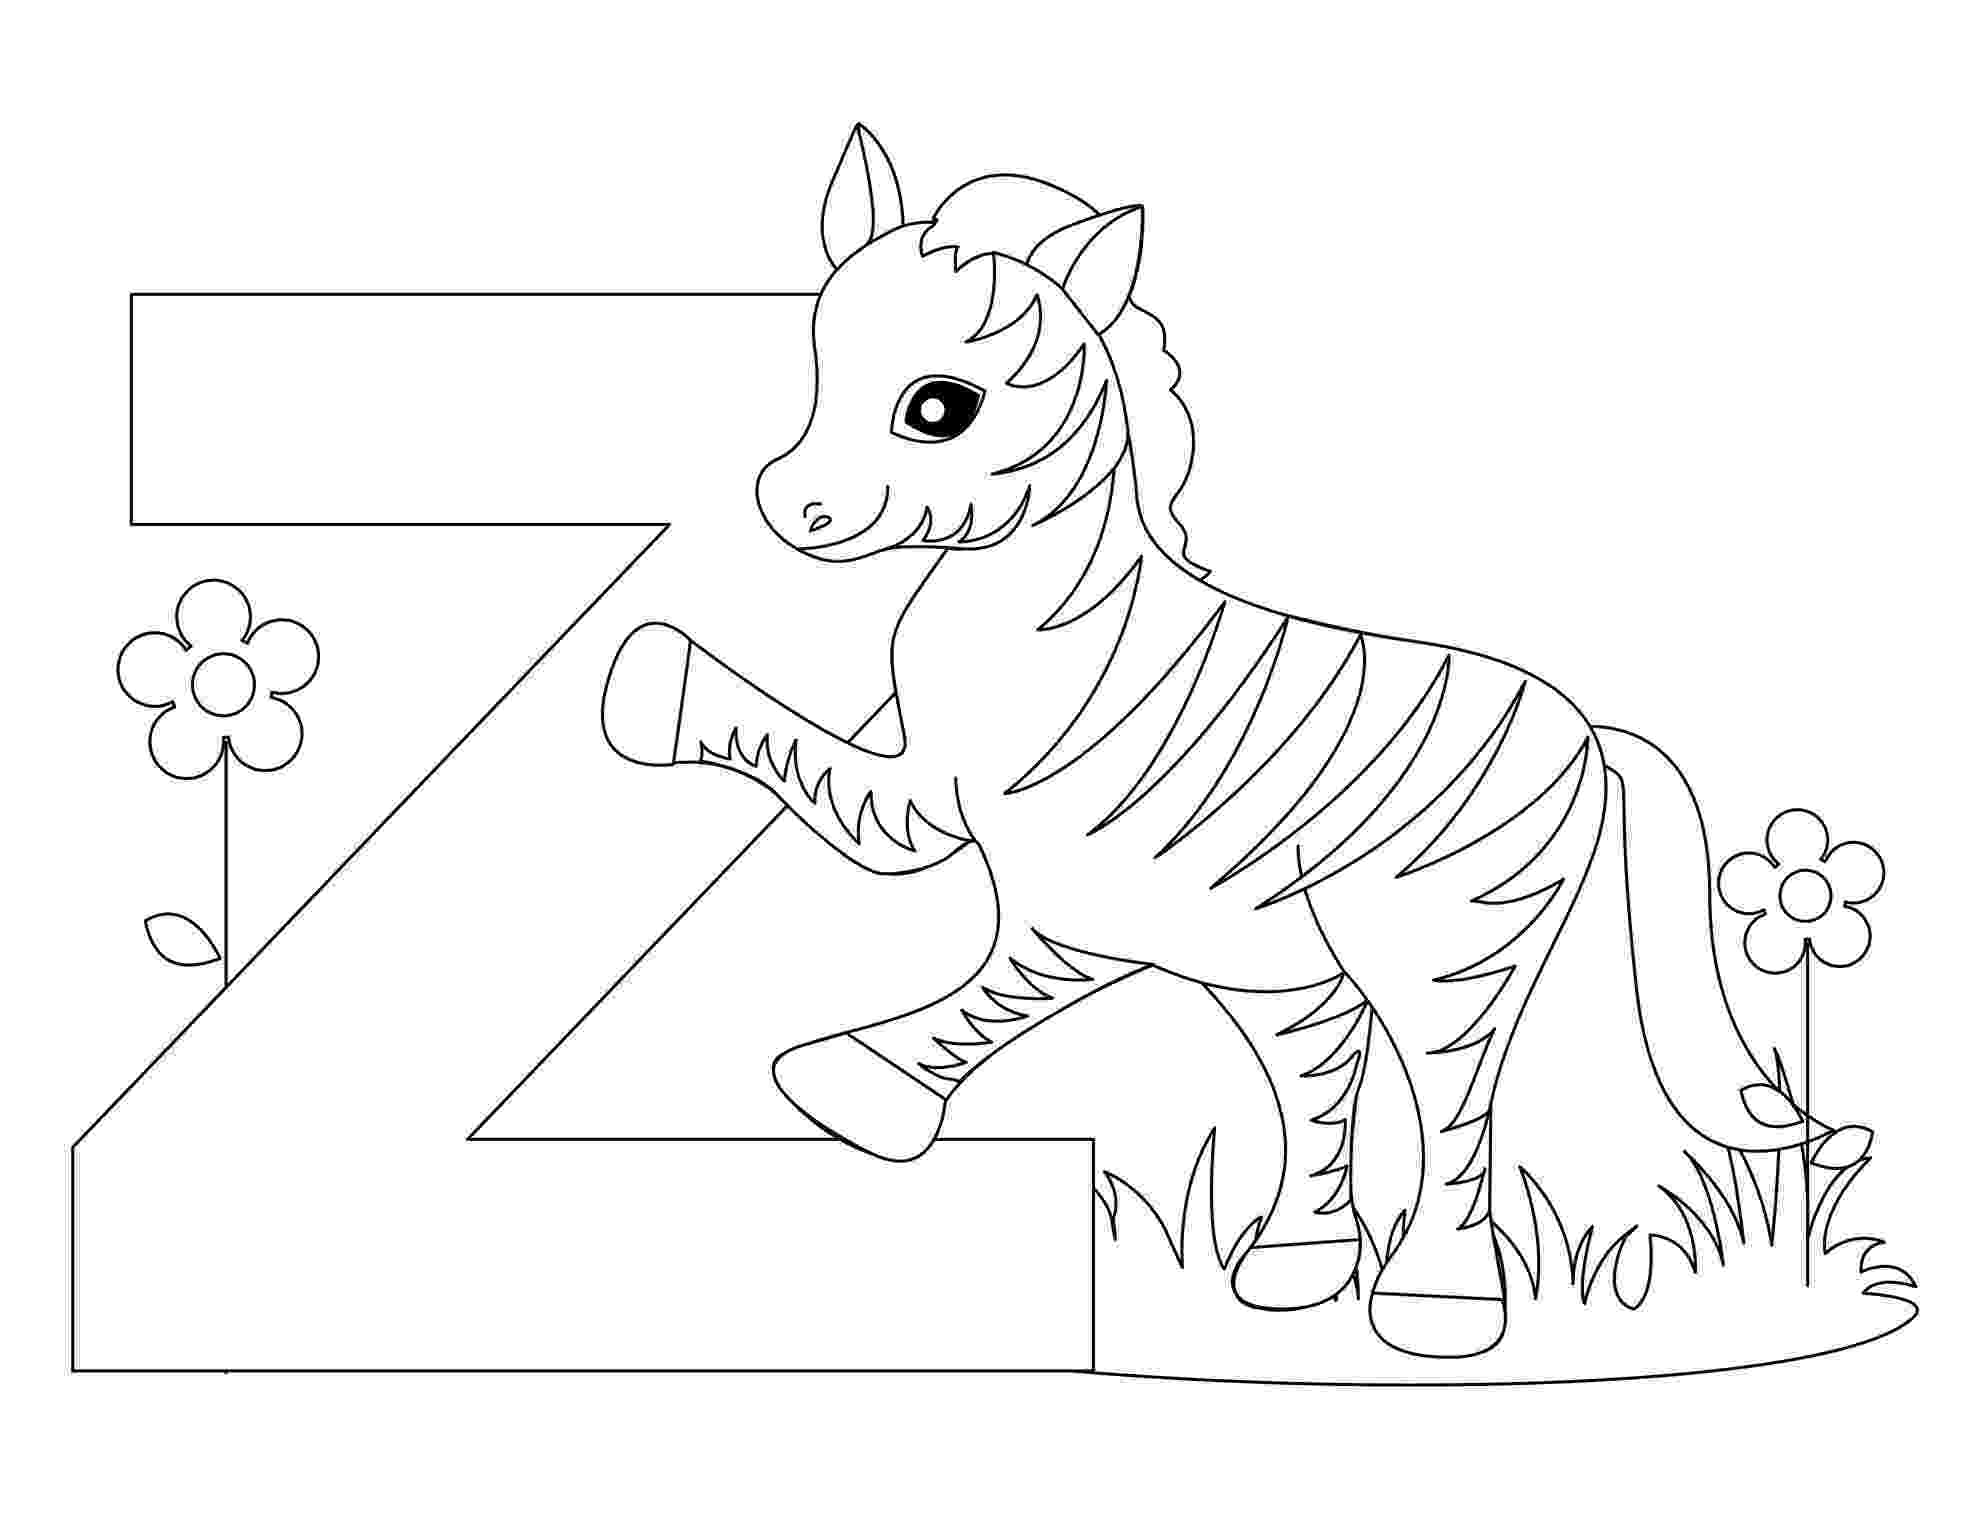 letter i coloring pages letter n coloring pages to download and print for free i pages coloring letter 